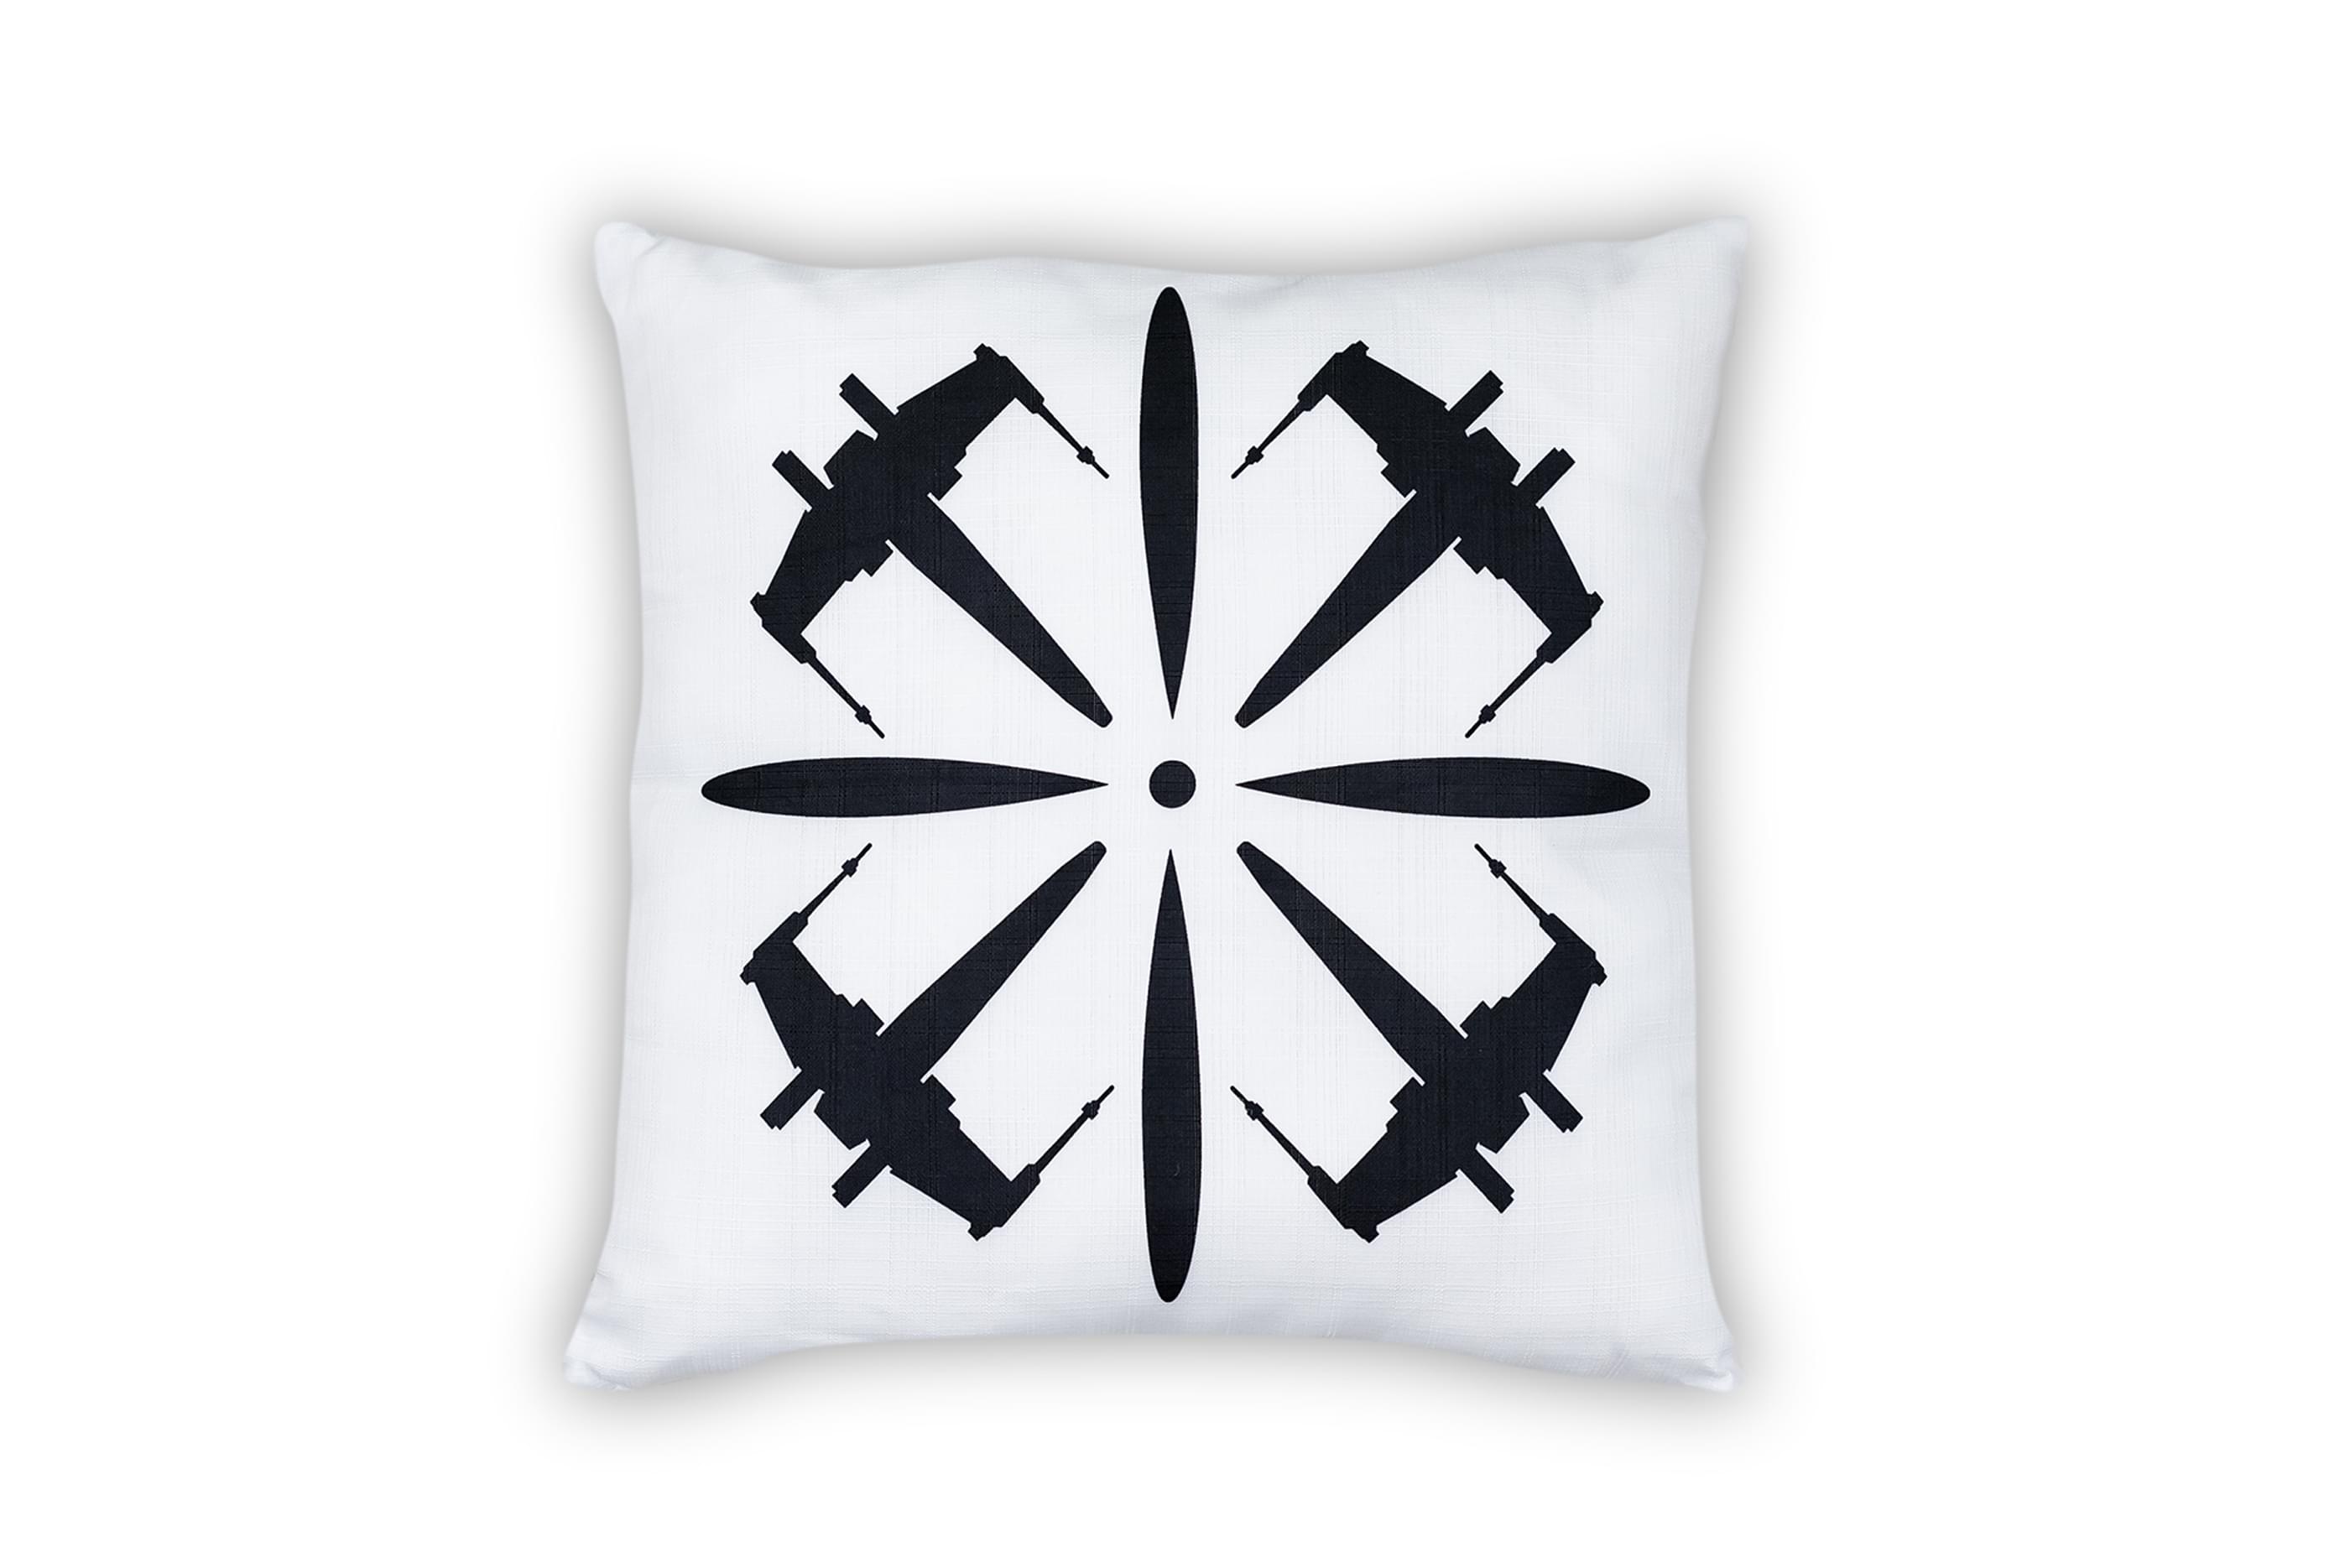 Star Wars White Throw Pillow , Black X-Wing Fighter Design , 18 X 18 Inches